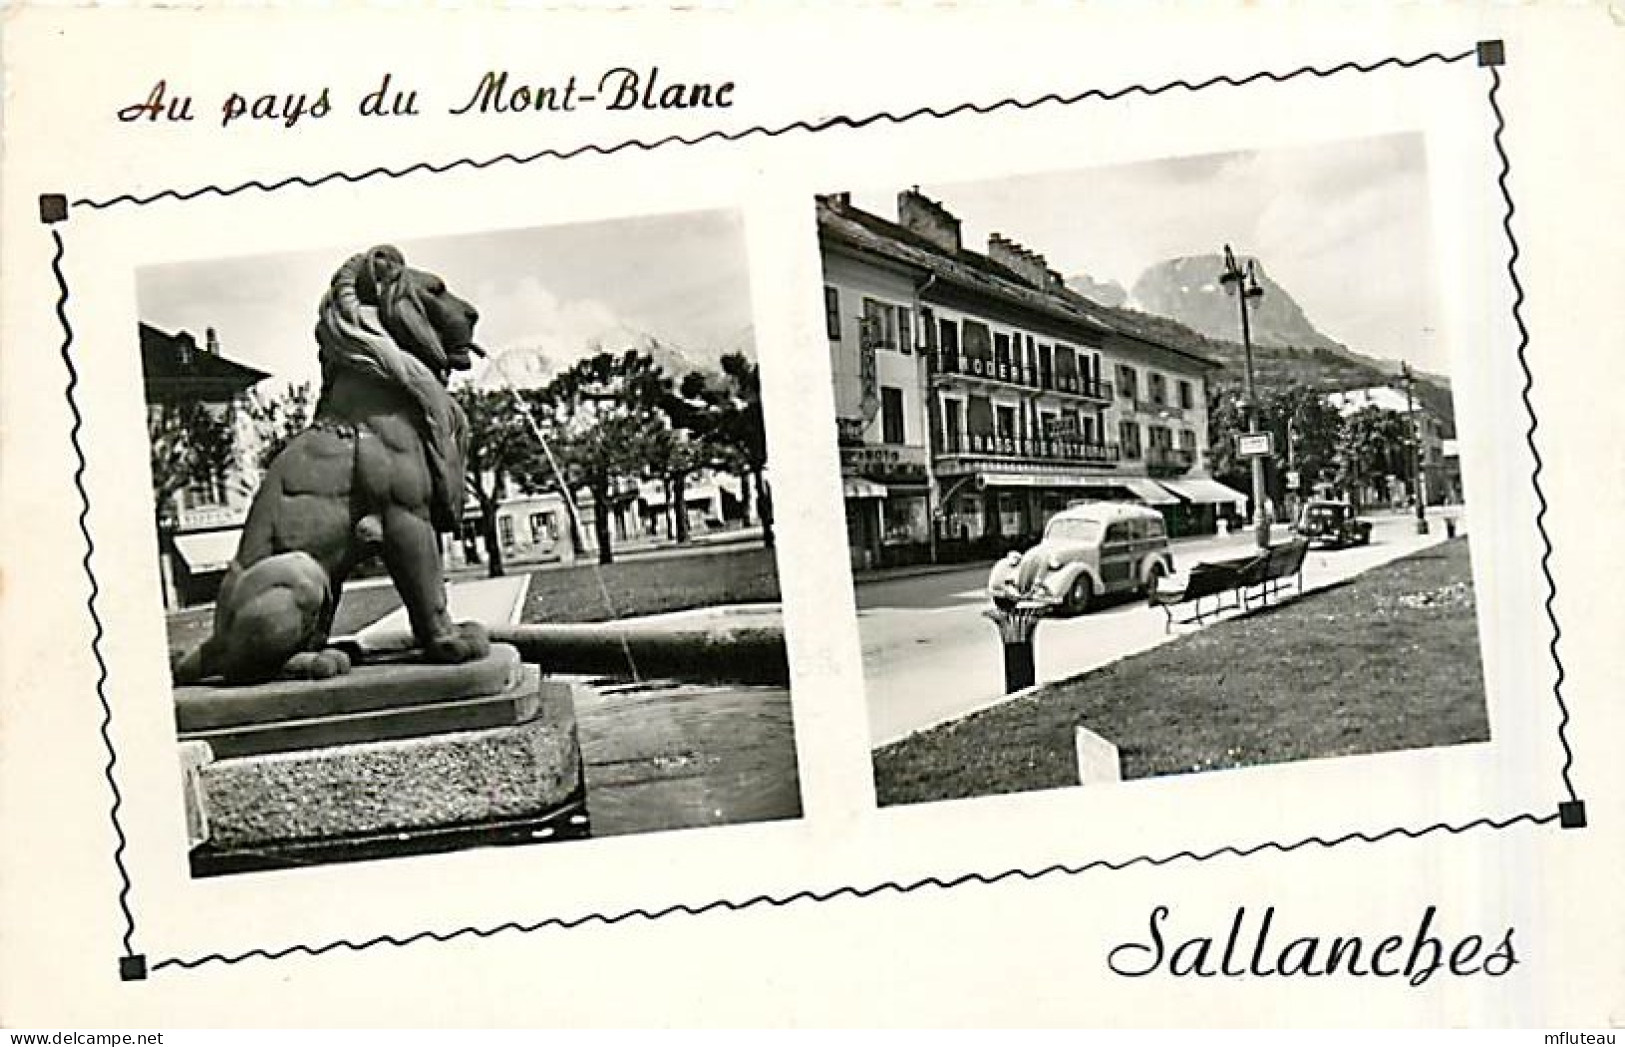 74* SALLANCHES  Place Charles Albert  CPSM (petit Format)       MA96,0048 - Sallanches